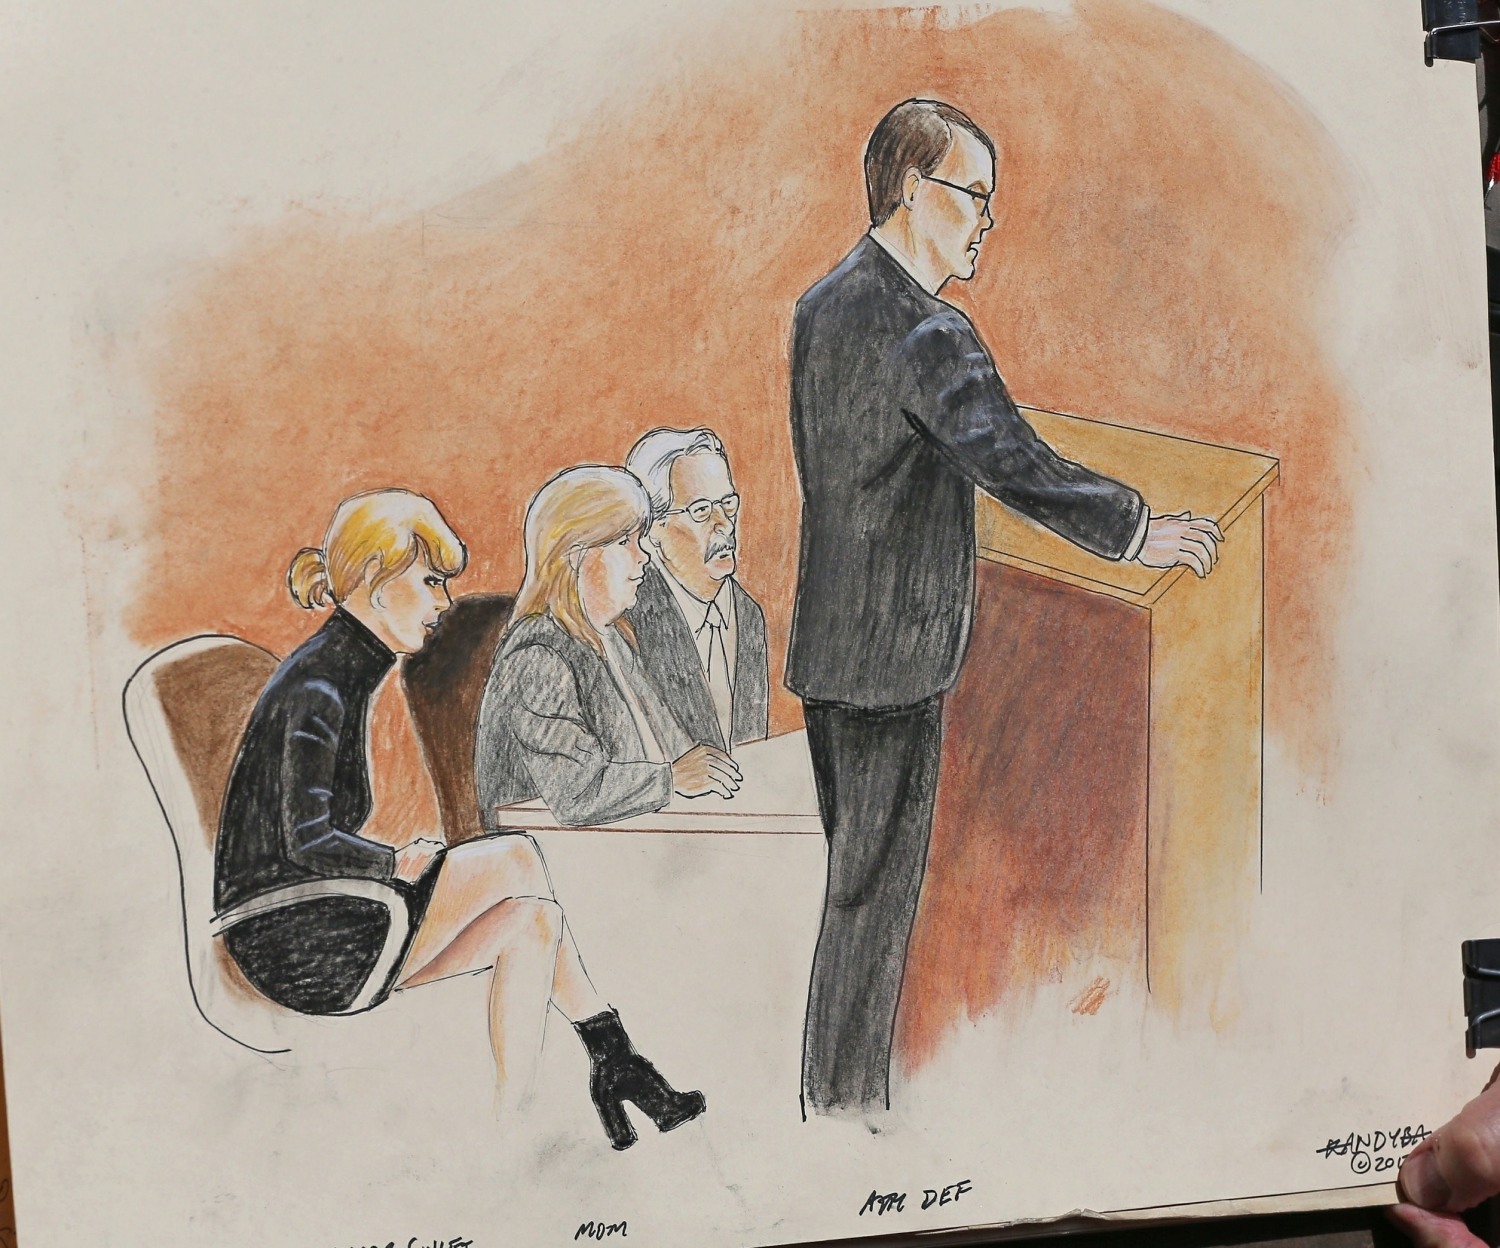 Jeff Kandyba shows off his courtroom drawings from the Taylor Swift VS David Mueller case